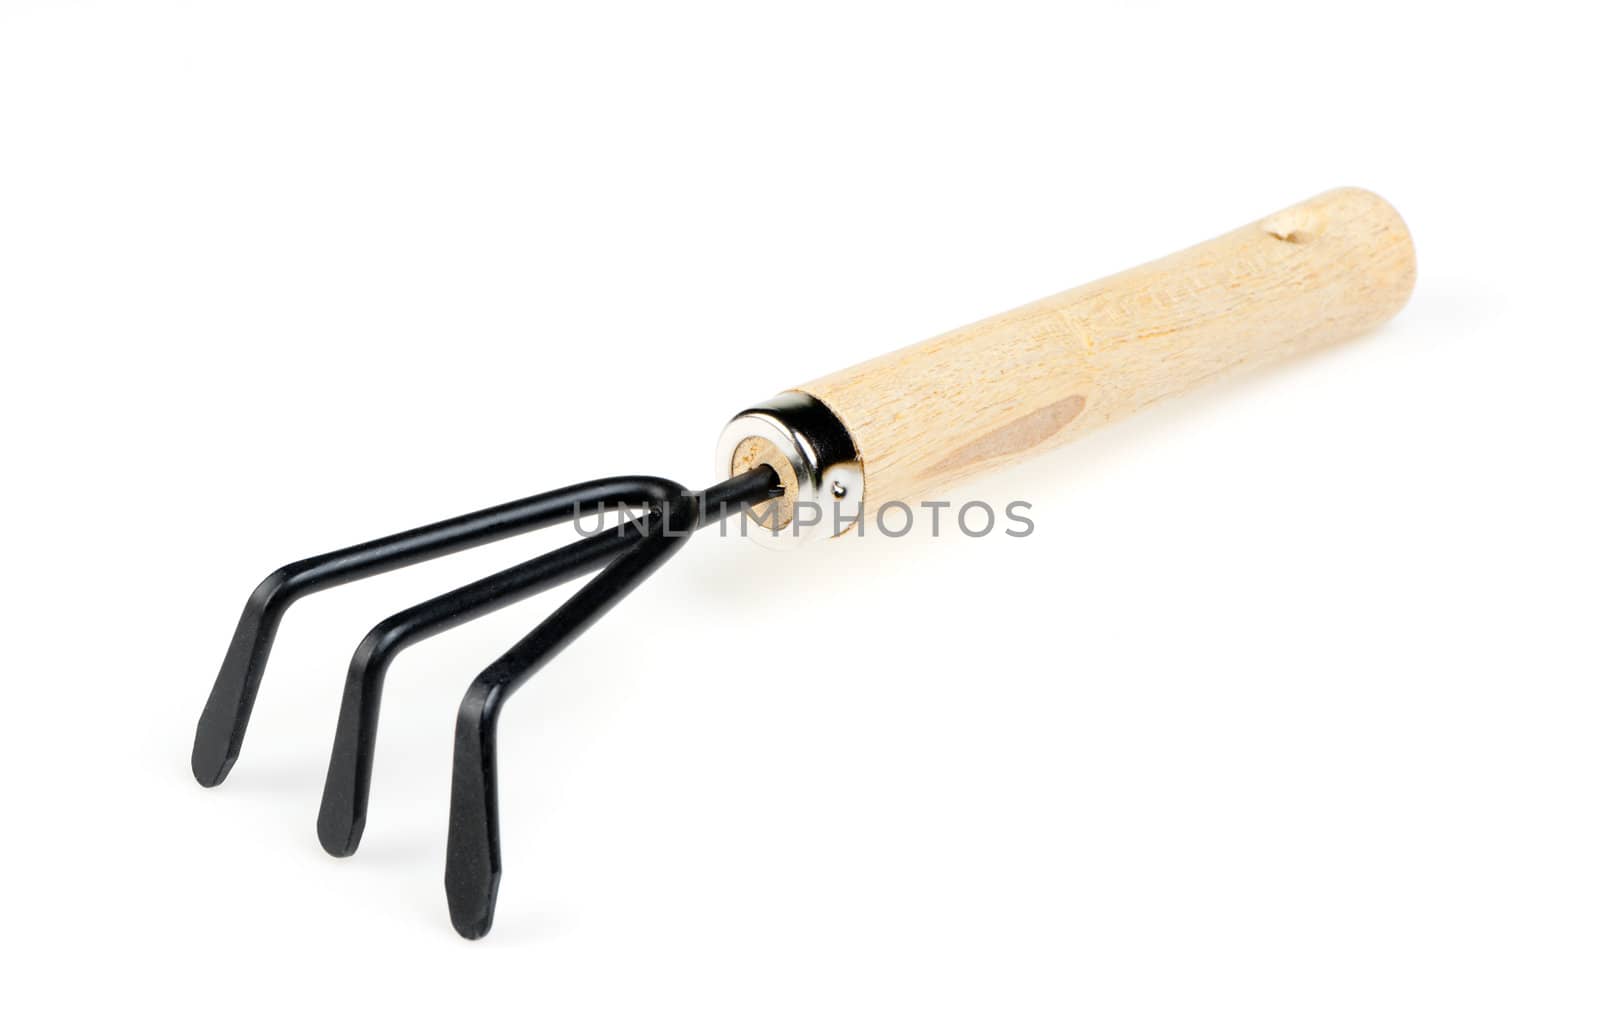 The garden tool a rake. Isolated on a white background